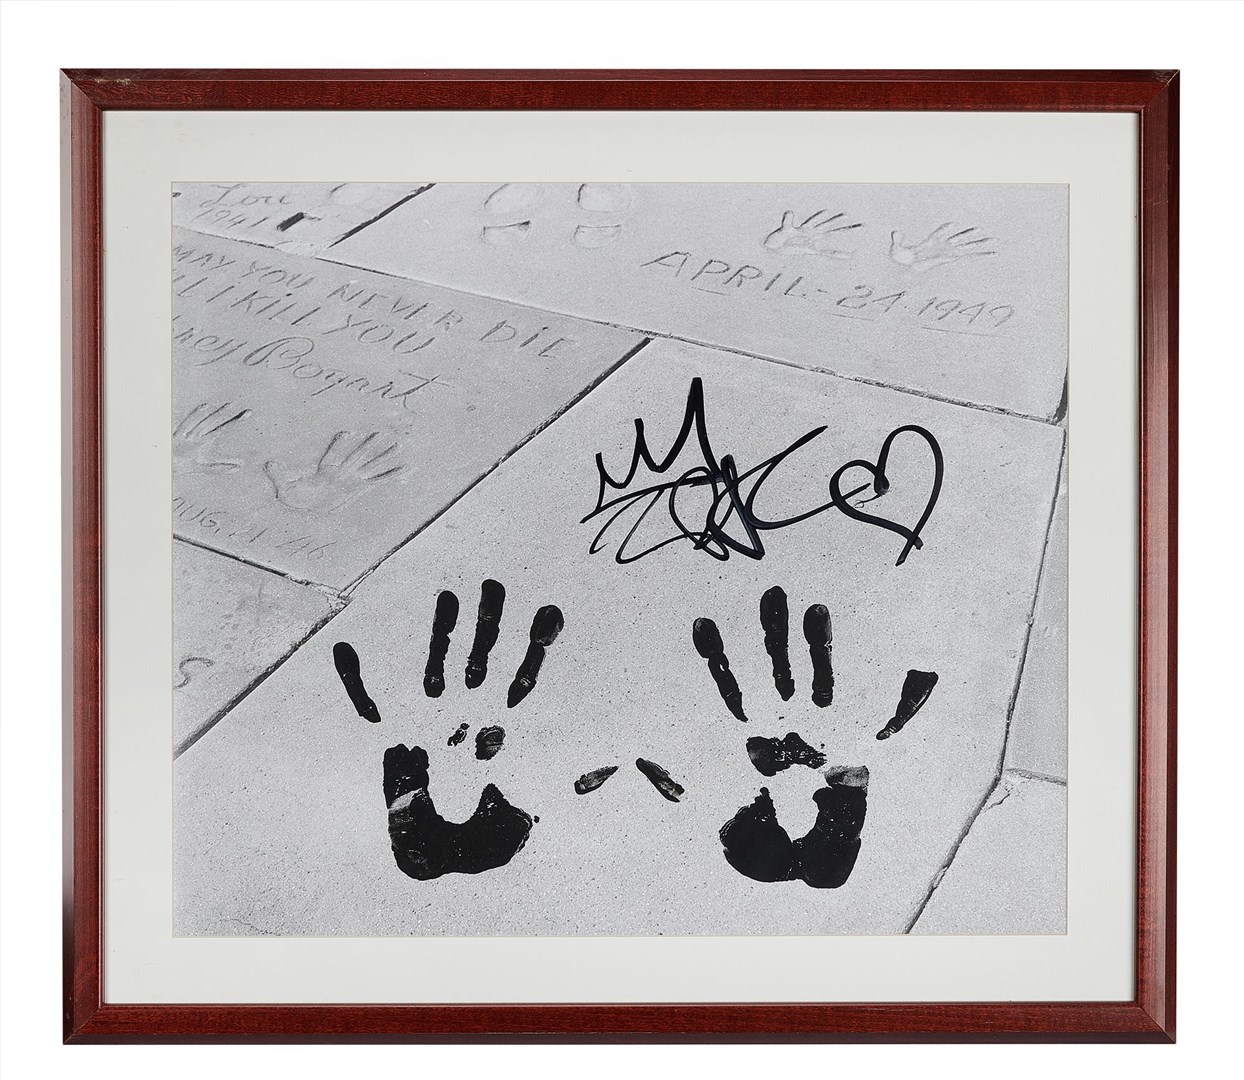 Other items to be auctioned include a framed large-format black and white photo print with rap legend Shakur’s hand print (Julien’s Auctions/PA)